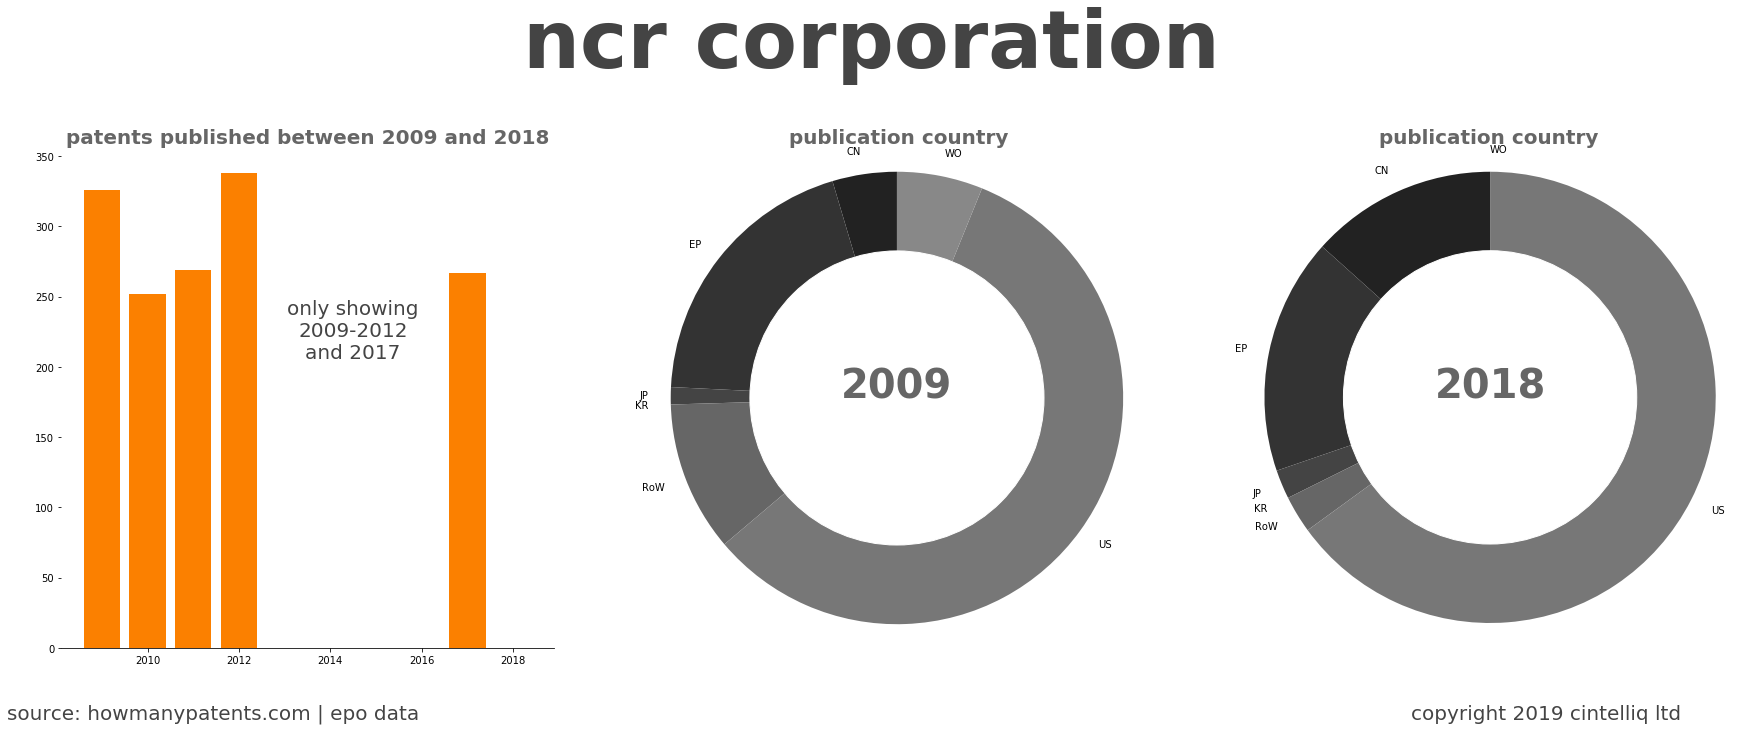 summary of patents for Ncr Corporation